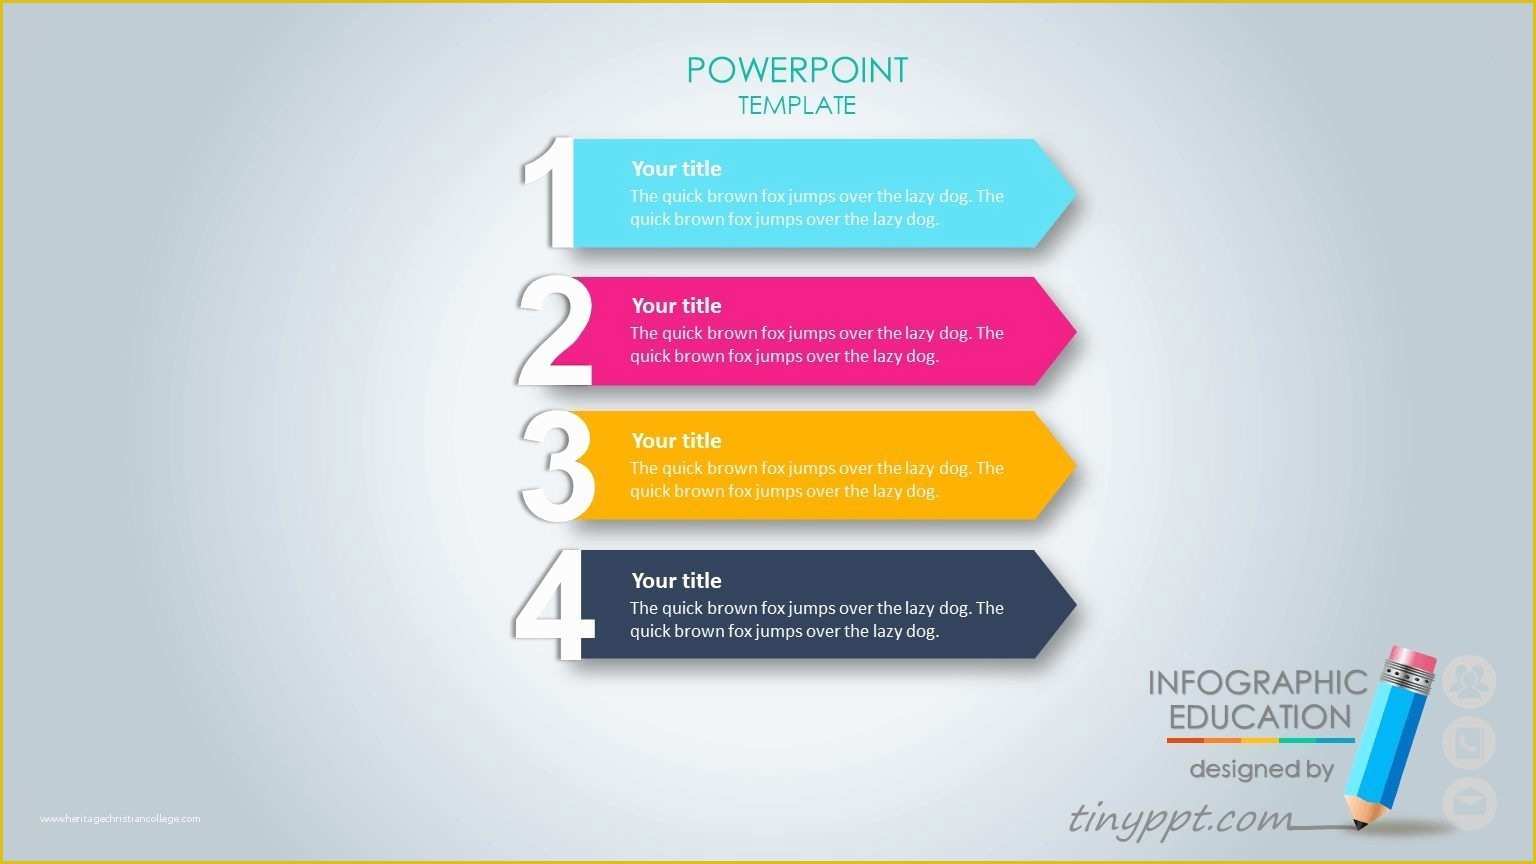 Powerpoint Templates Free Download Of Animated Ppt Templates Free Download for Project